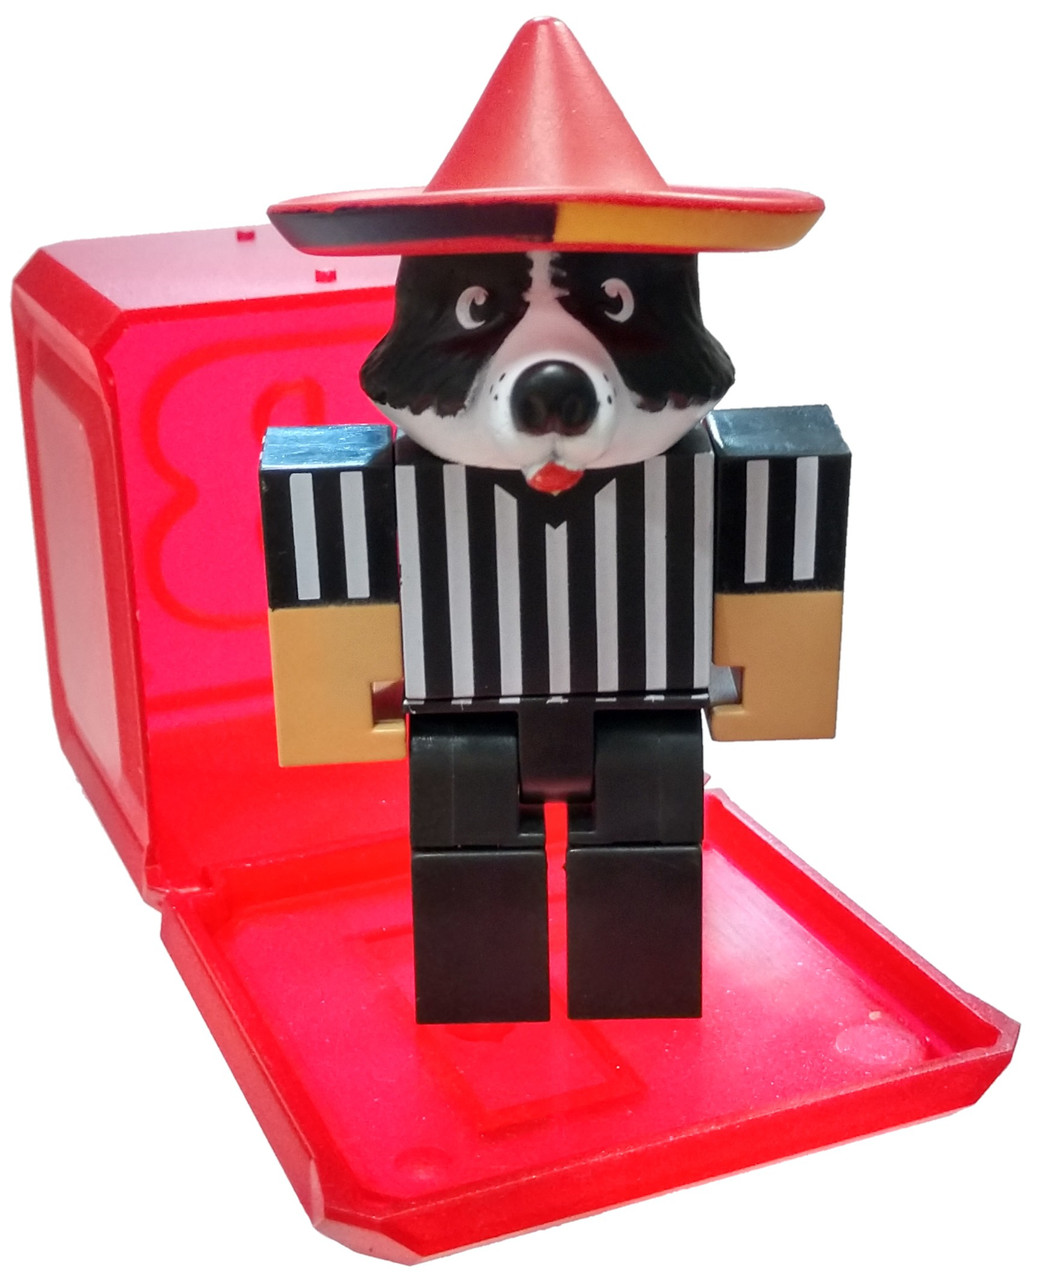 Roblox Celebrity Collection Series 5 High School Life Referee 3 Mini Figure With Red Cube And Online Code Loose Jazwares Toywiz - roblox high school toy code